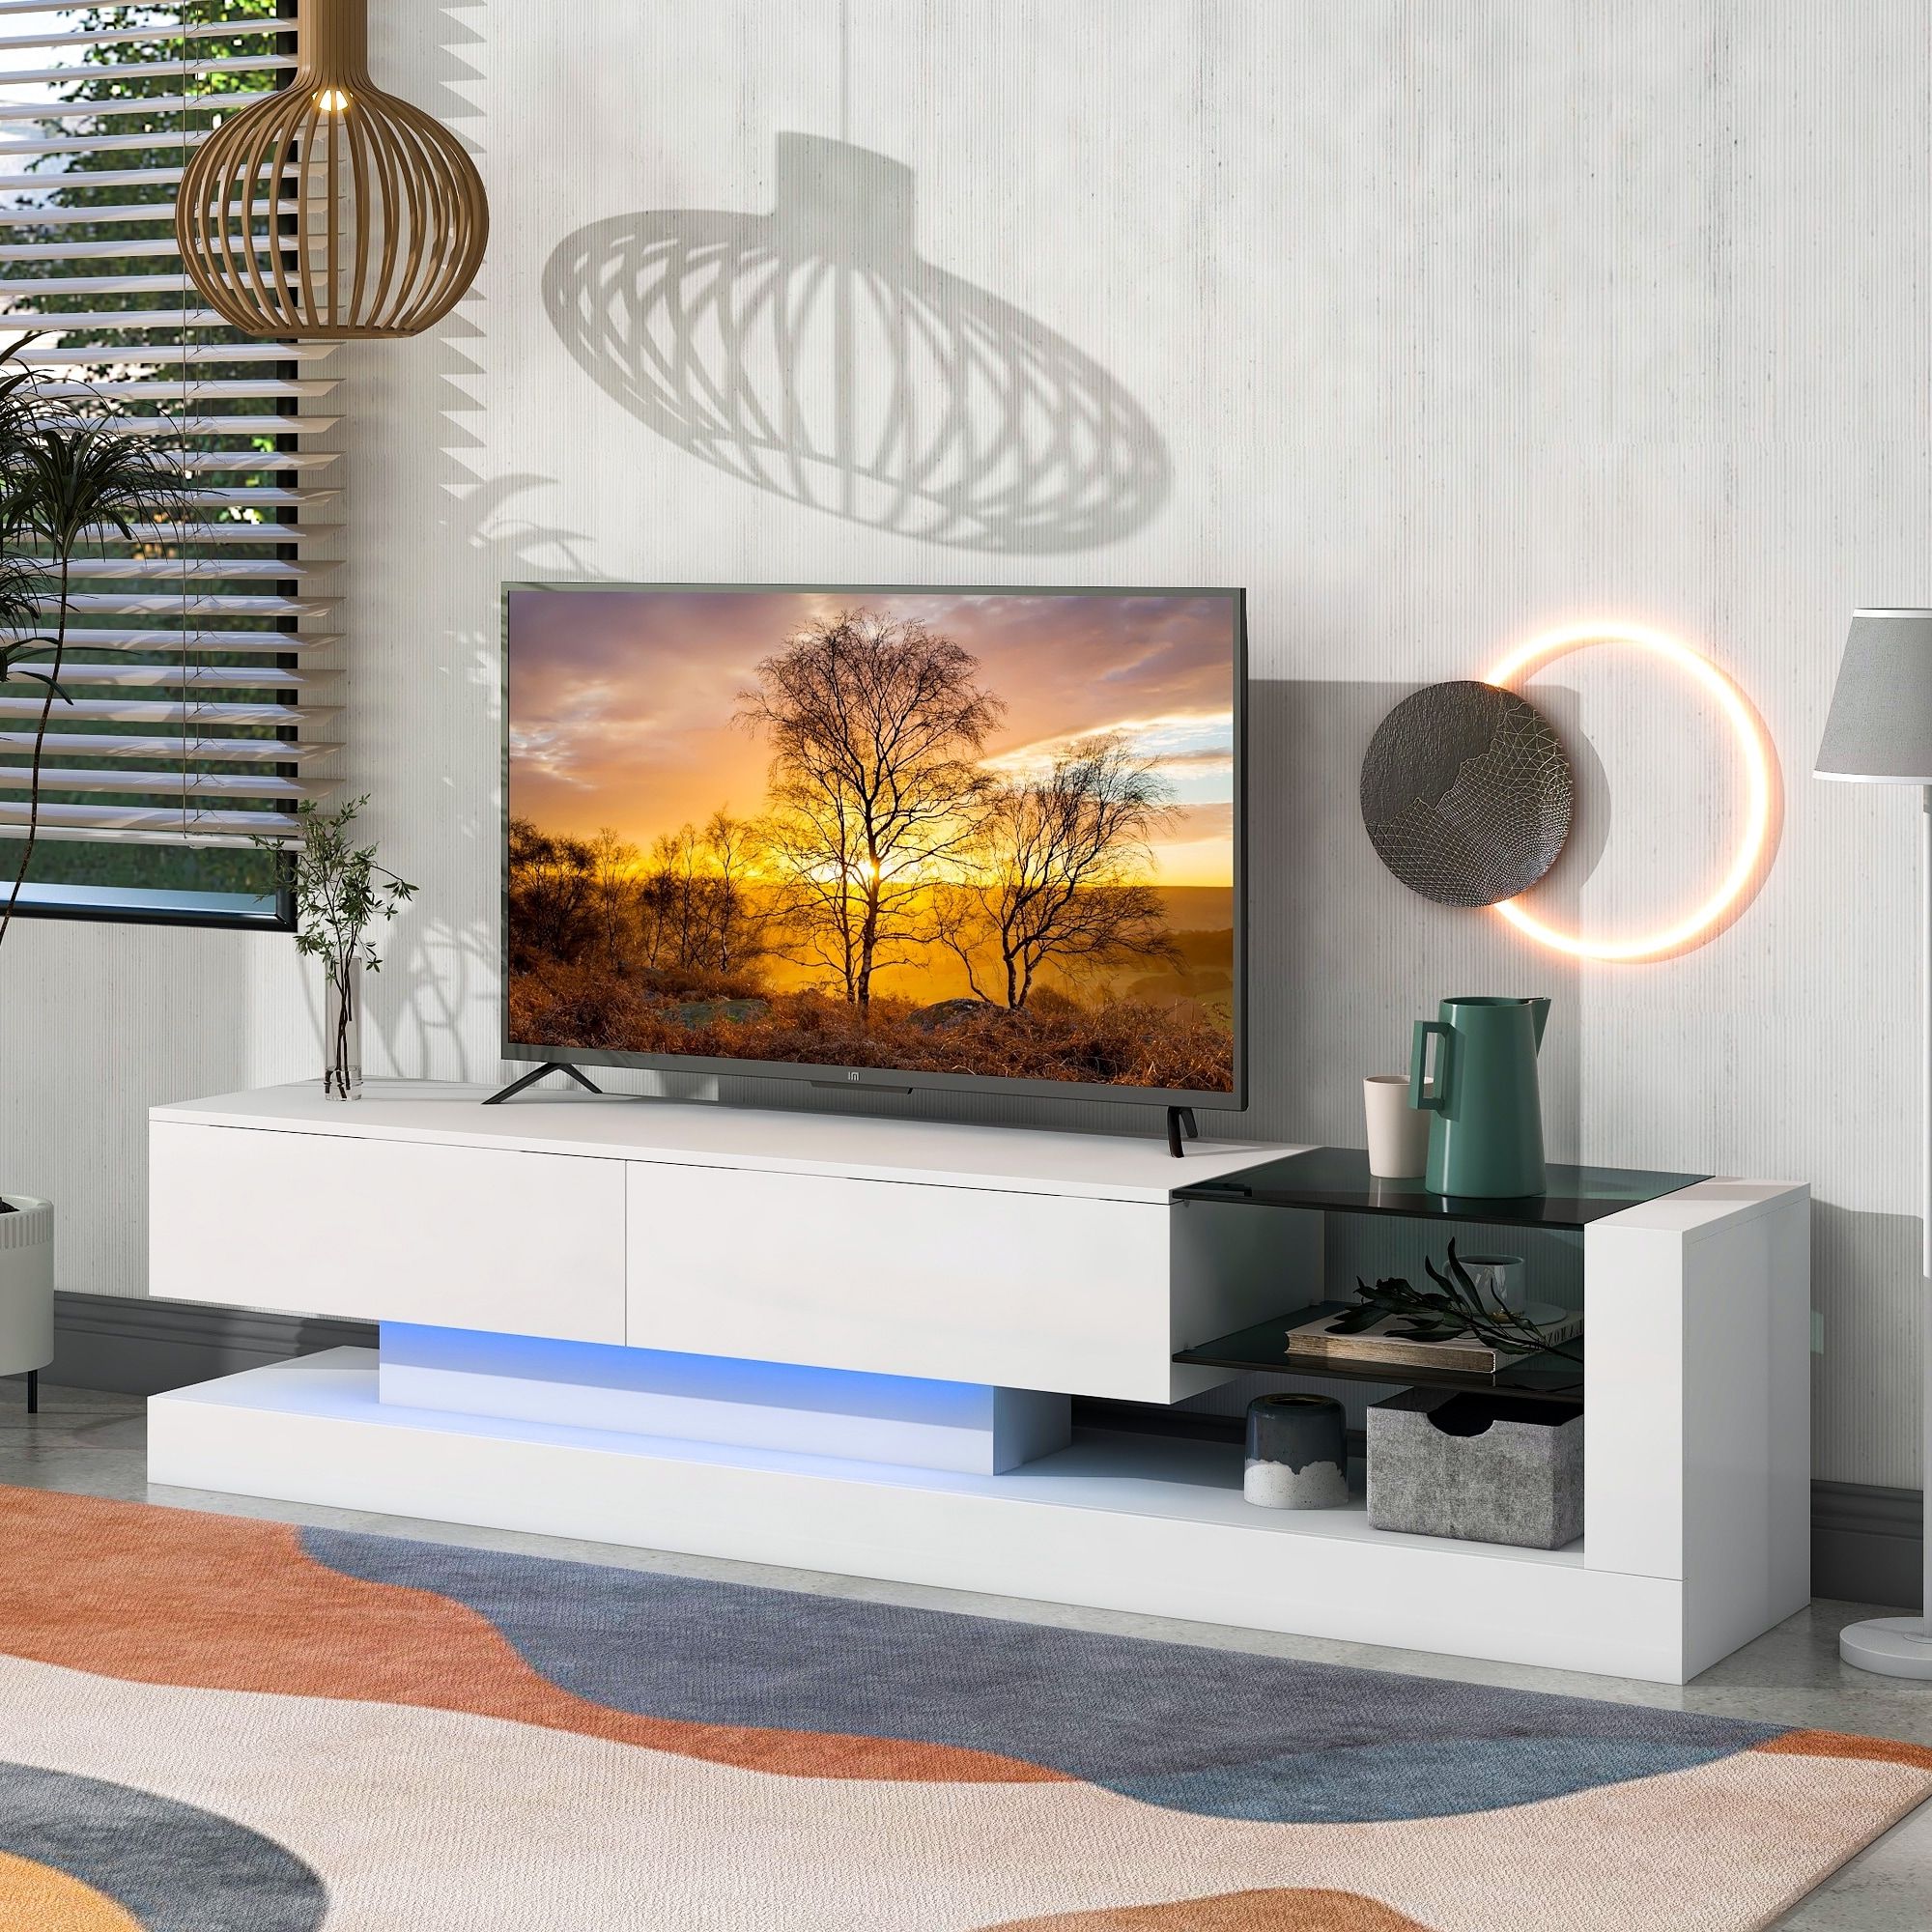 Modern Tv Stand With 16 Color Rgb Led Strip Lights – Bed Bath & Beyond –  37593439 With Regard To Rgb Tv Entertainment Centers (View 14 of 20)